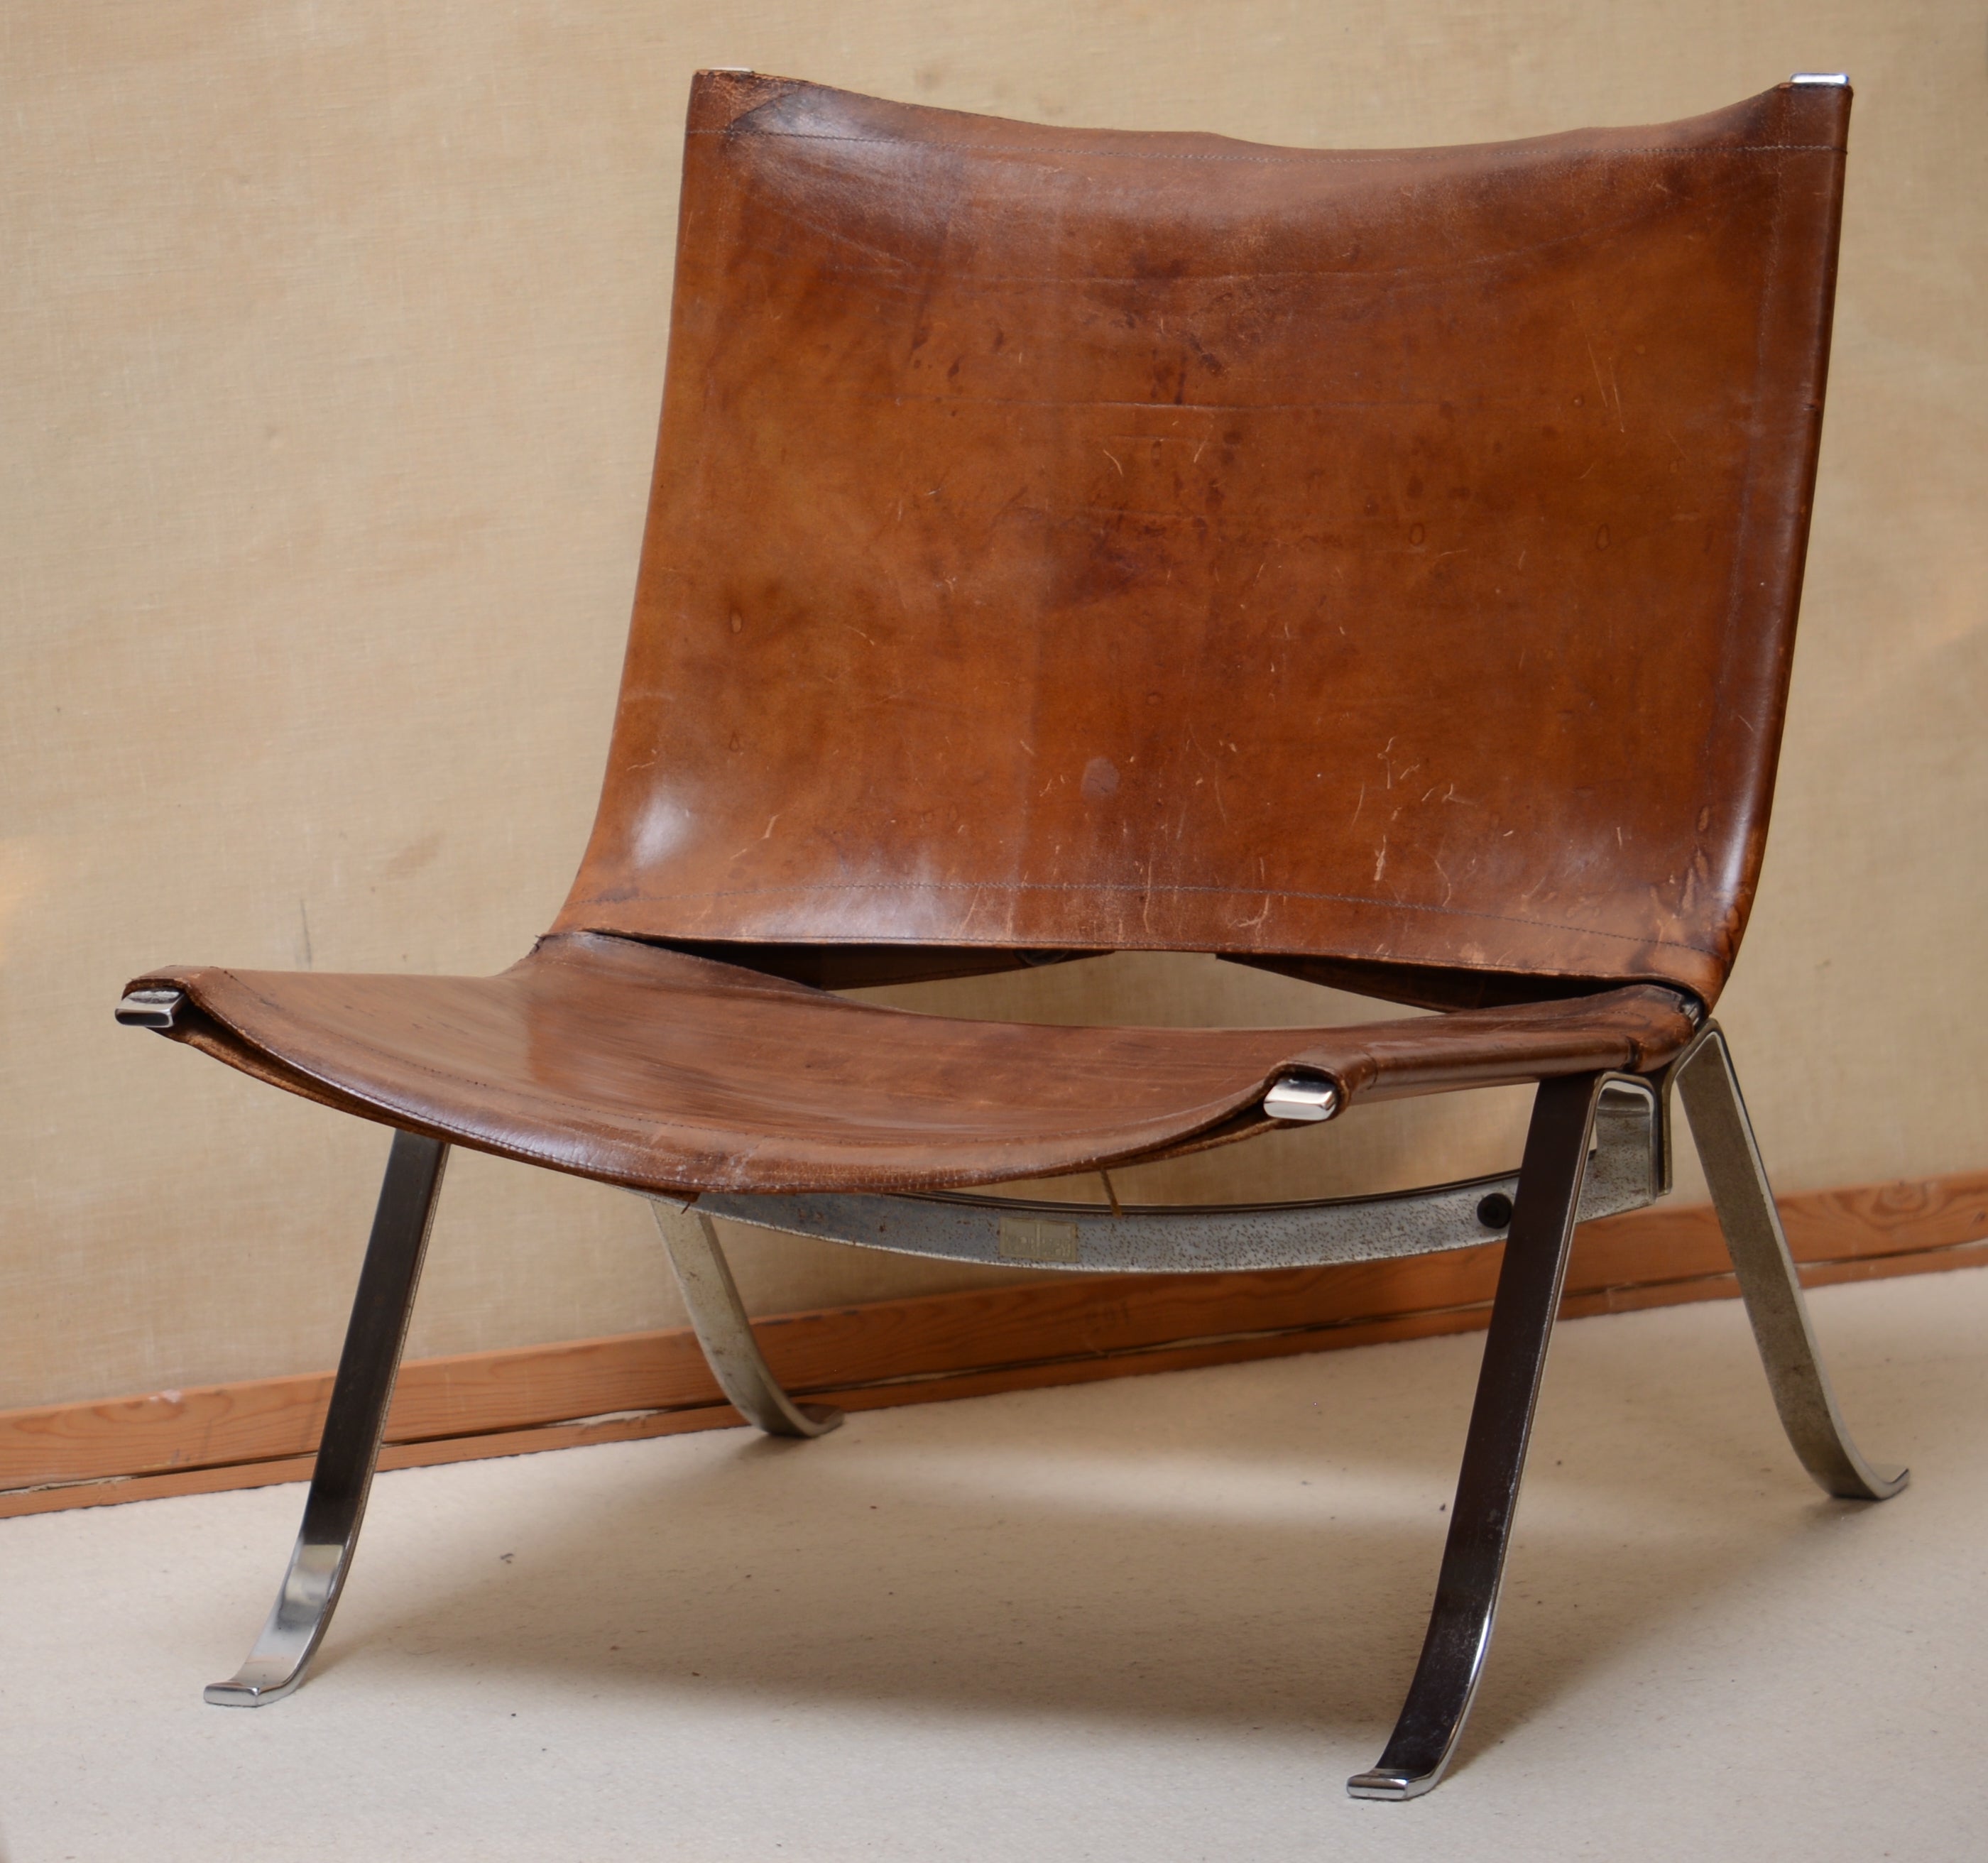 This is an unusual lounge chair made of thick leather that has beautifully patinated with years. The frame is made of thick steal with nickel as finish. there's some traces of time that we decided to keep and not clean but it can shine even more